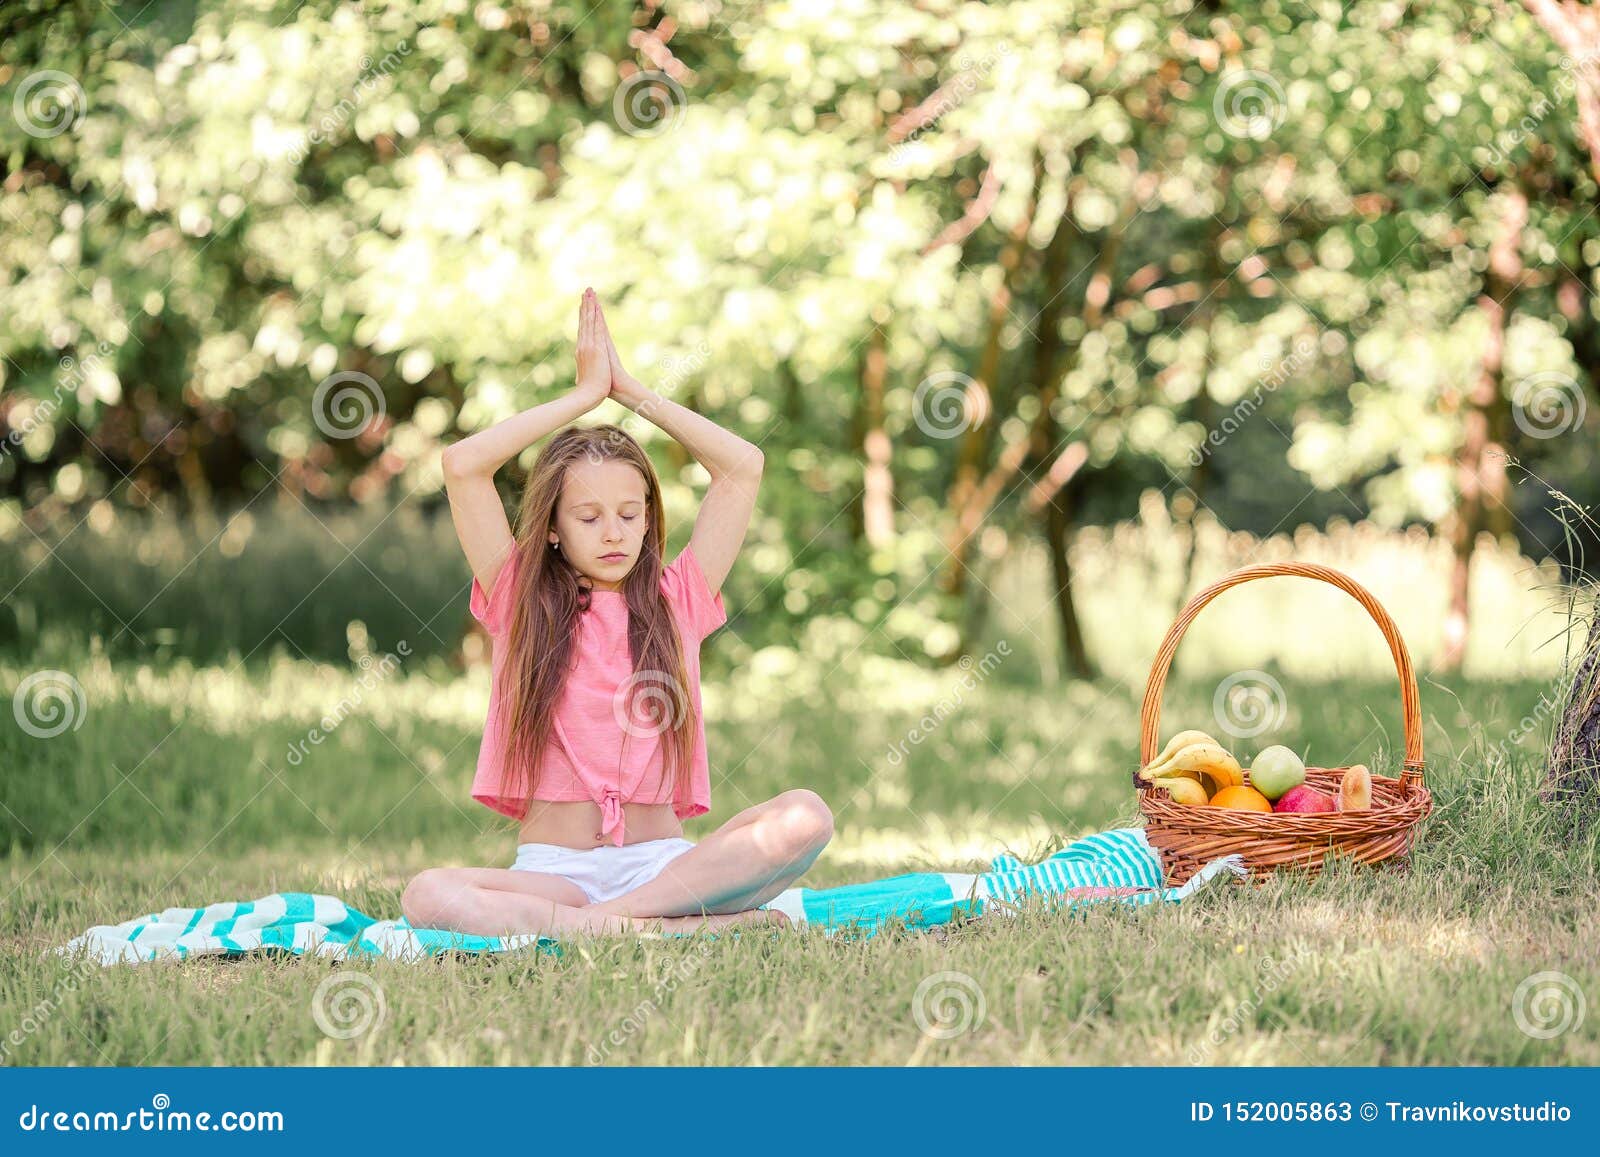 Little Girl in Yoga Position in the Park. Stock Image - Image of